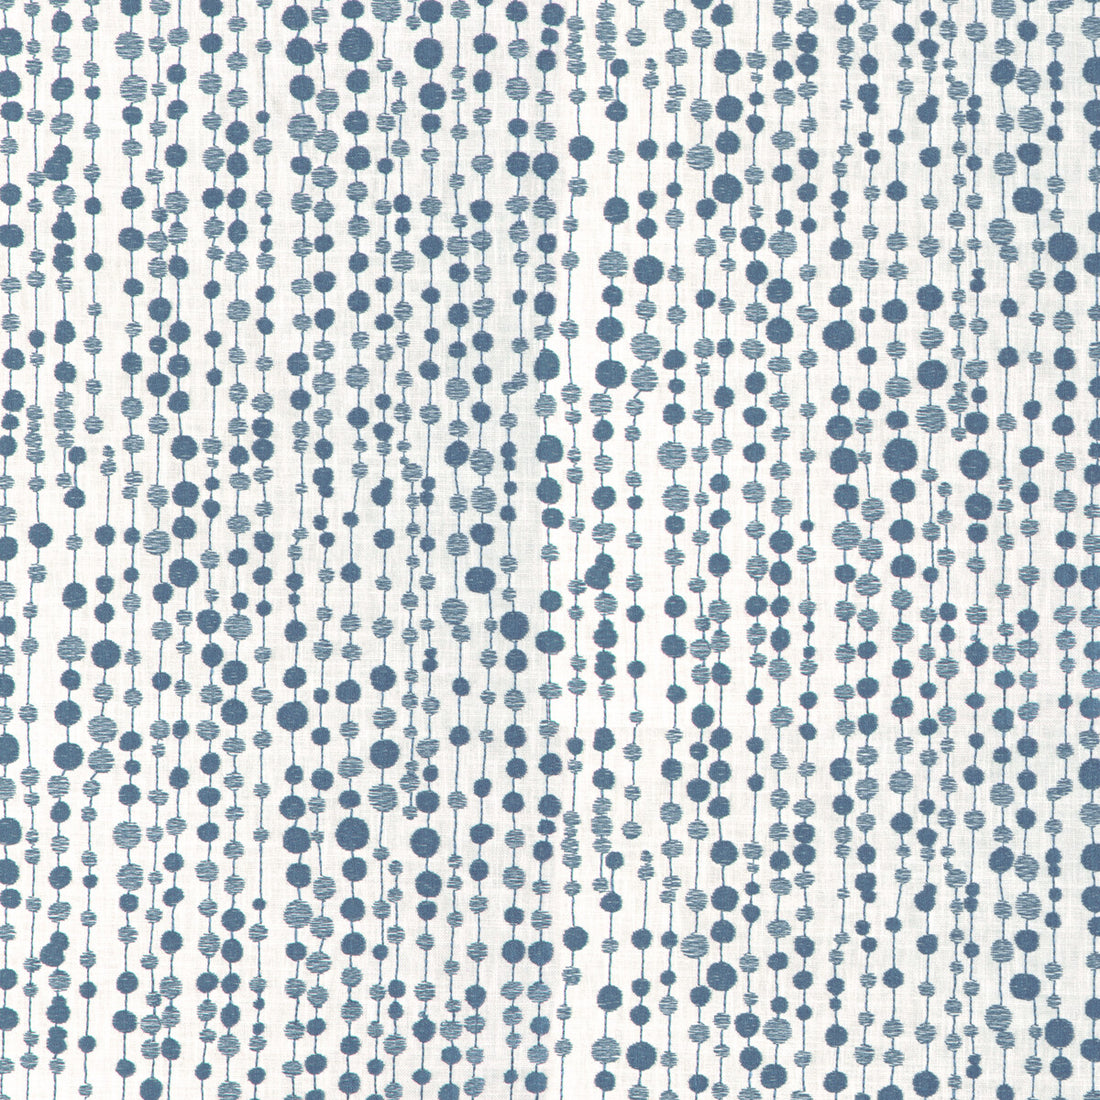 String Dot fabric in ink color - pattern 36953.51.0 - by Kravet Basics in the Mid-Century Modern collection